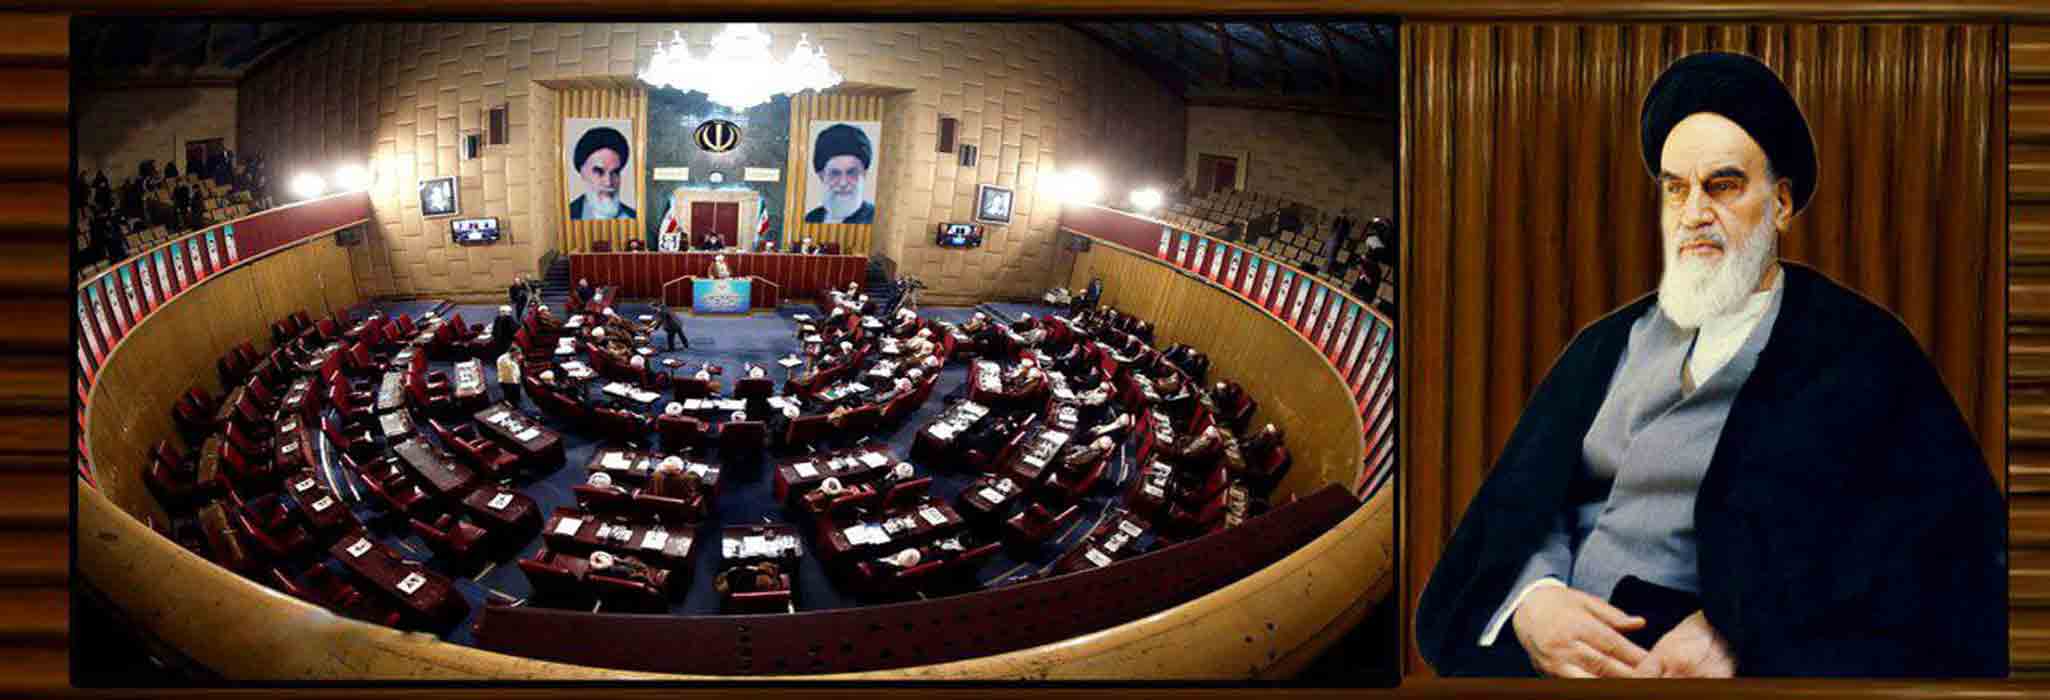 Islamic parliament and  religious democracy 